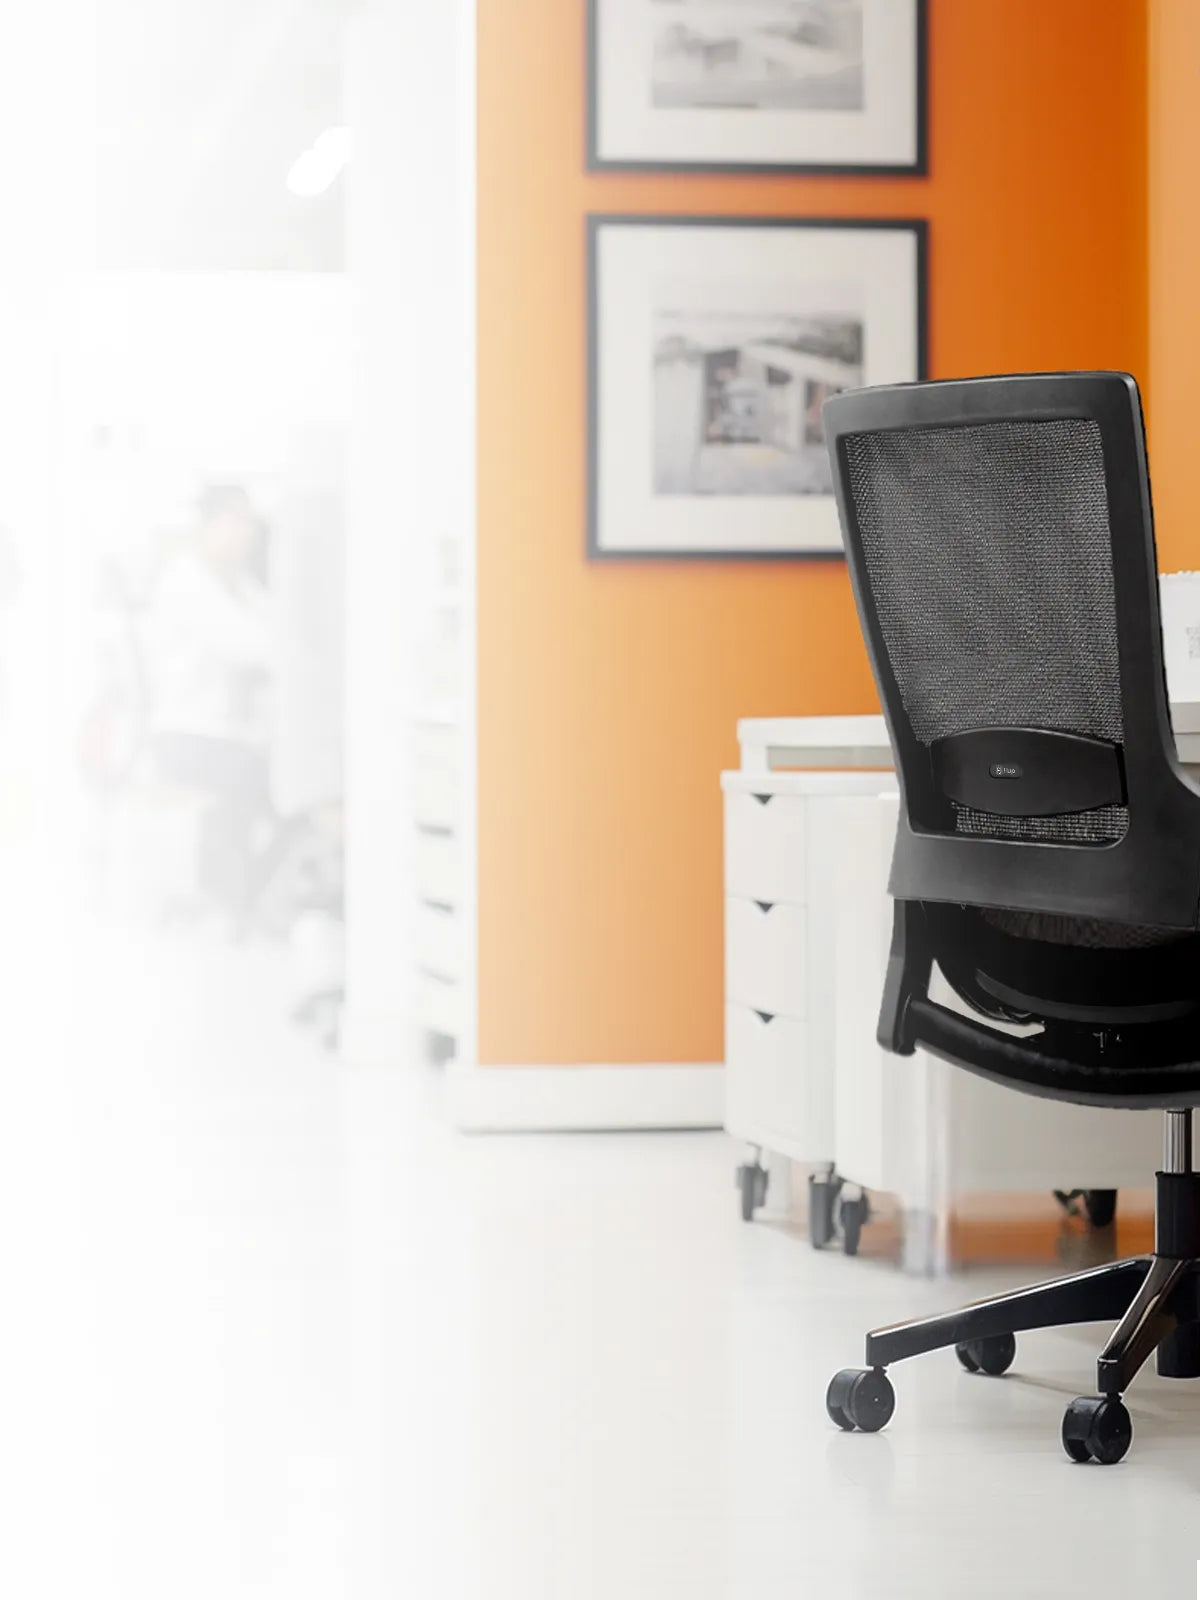 Ergonomic office chairs in a brightly colored office space